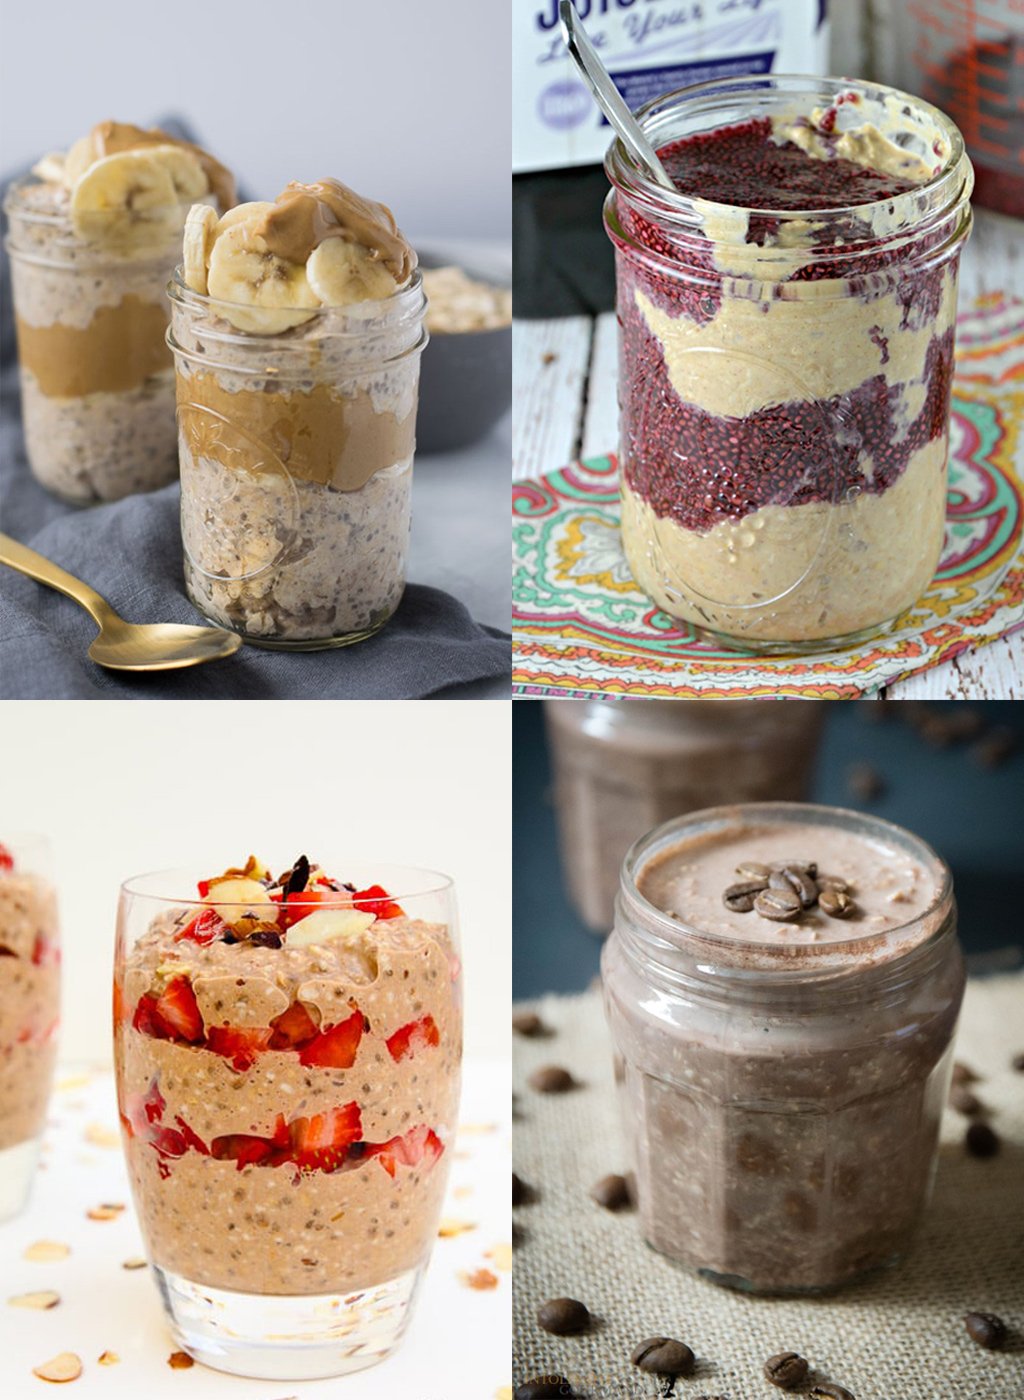 75+ Best Make-Ahead Oatmeal Recipes to Eat for Breakfast - The very best list of overnight oats, breakfast bars and cookies, and oatmeal bakes! - ProjectMealPlan.com